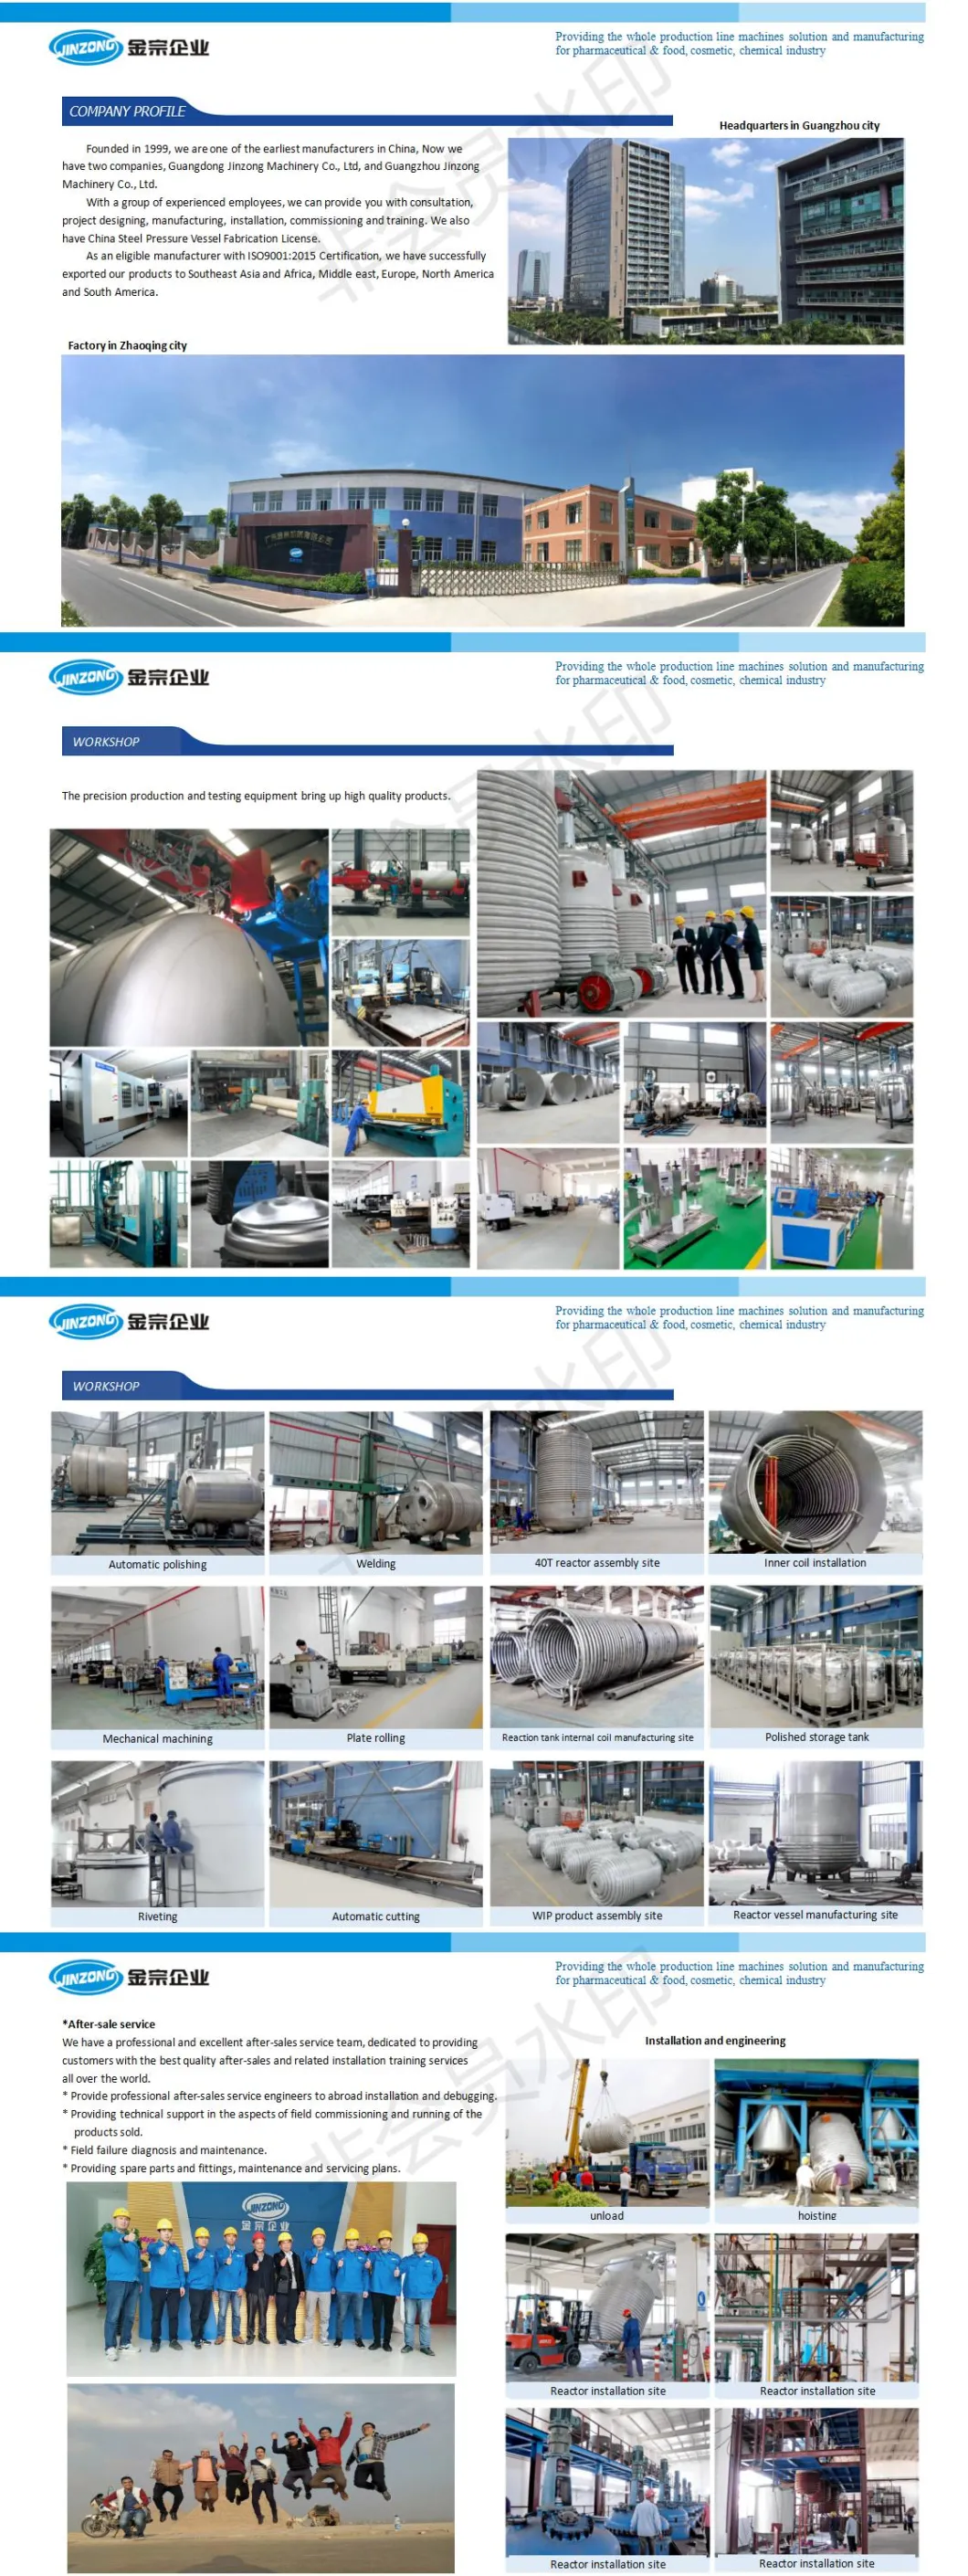 Stainless Steel Pharmaceutical Syrup Manufacturing Plant Mixing Storage Tank